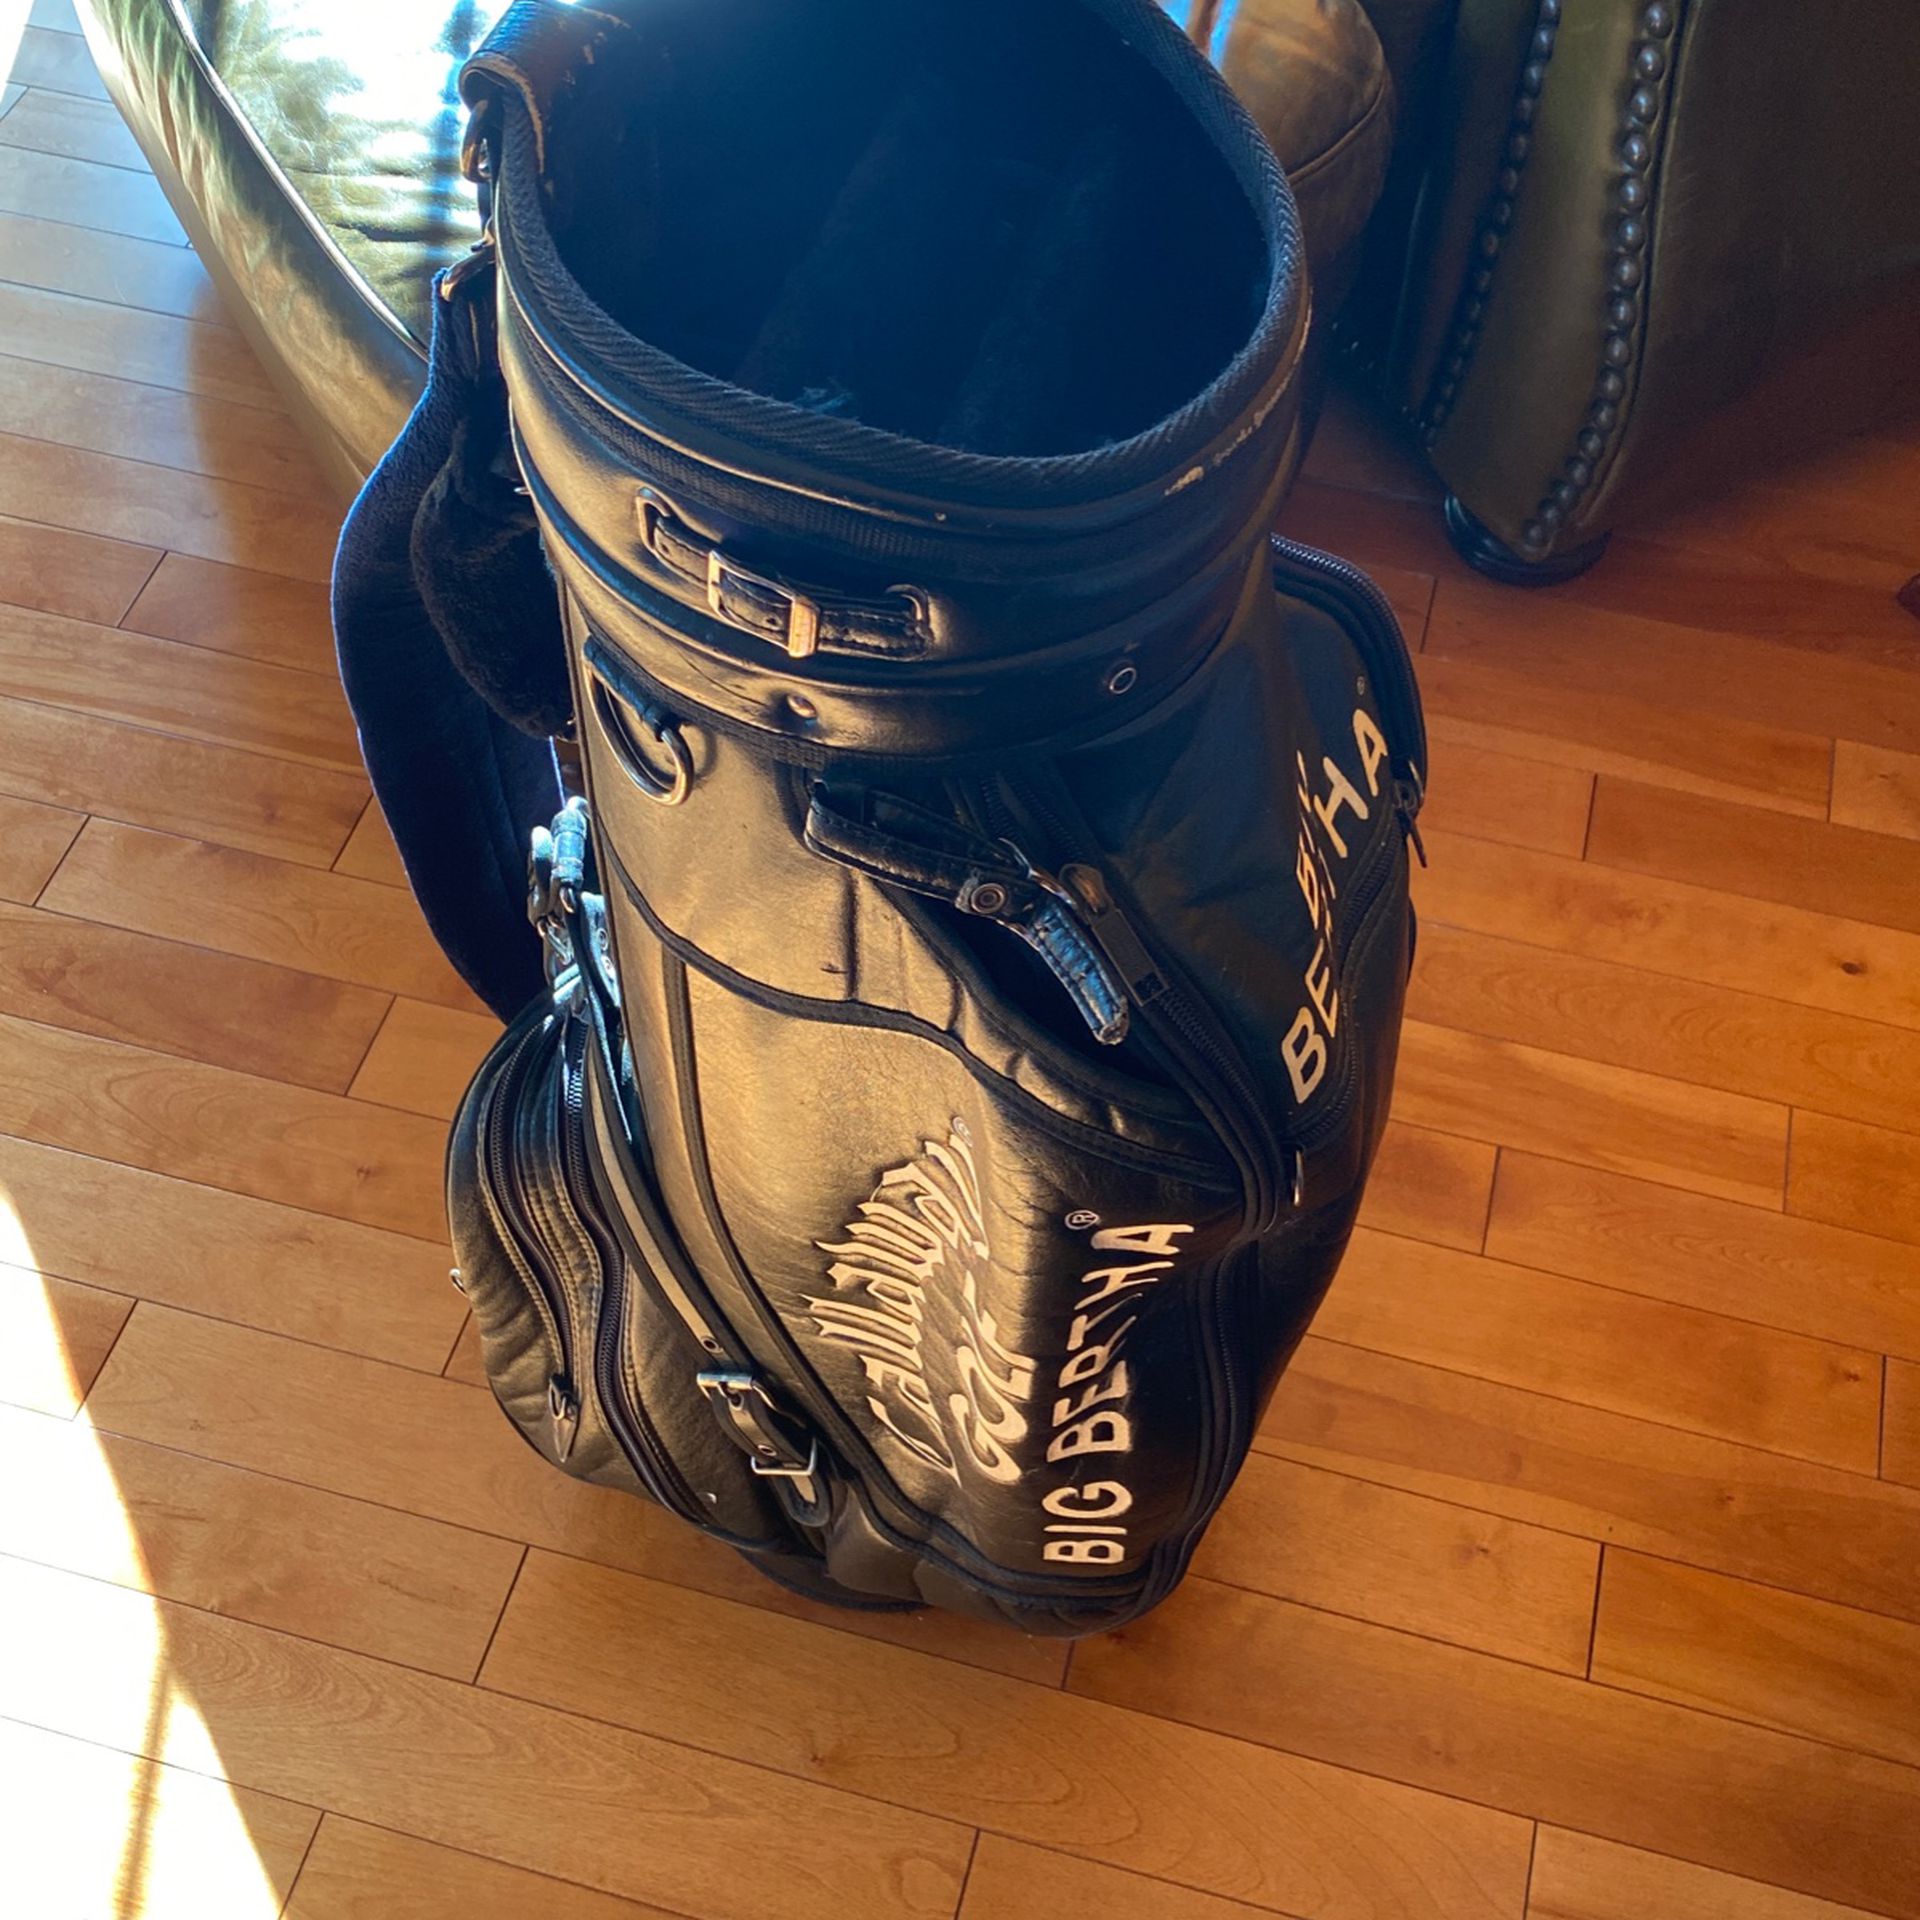 Callaway Golf Bag With Rain Cover, Great Condition